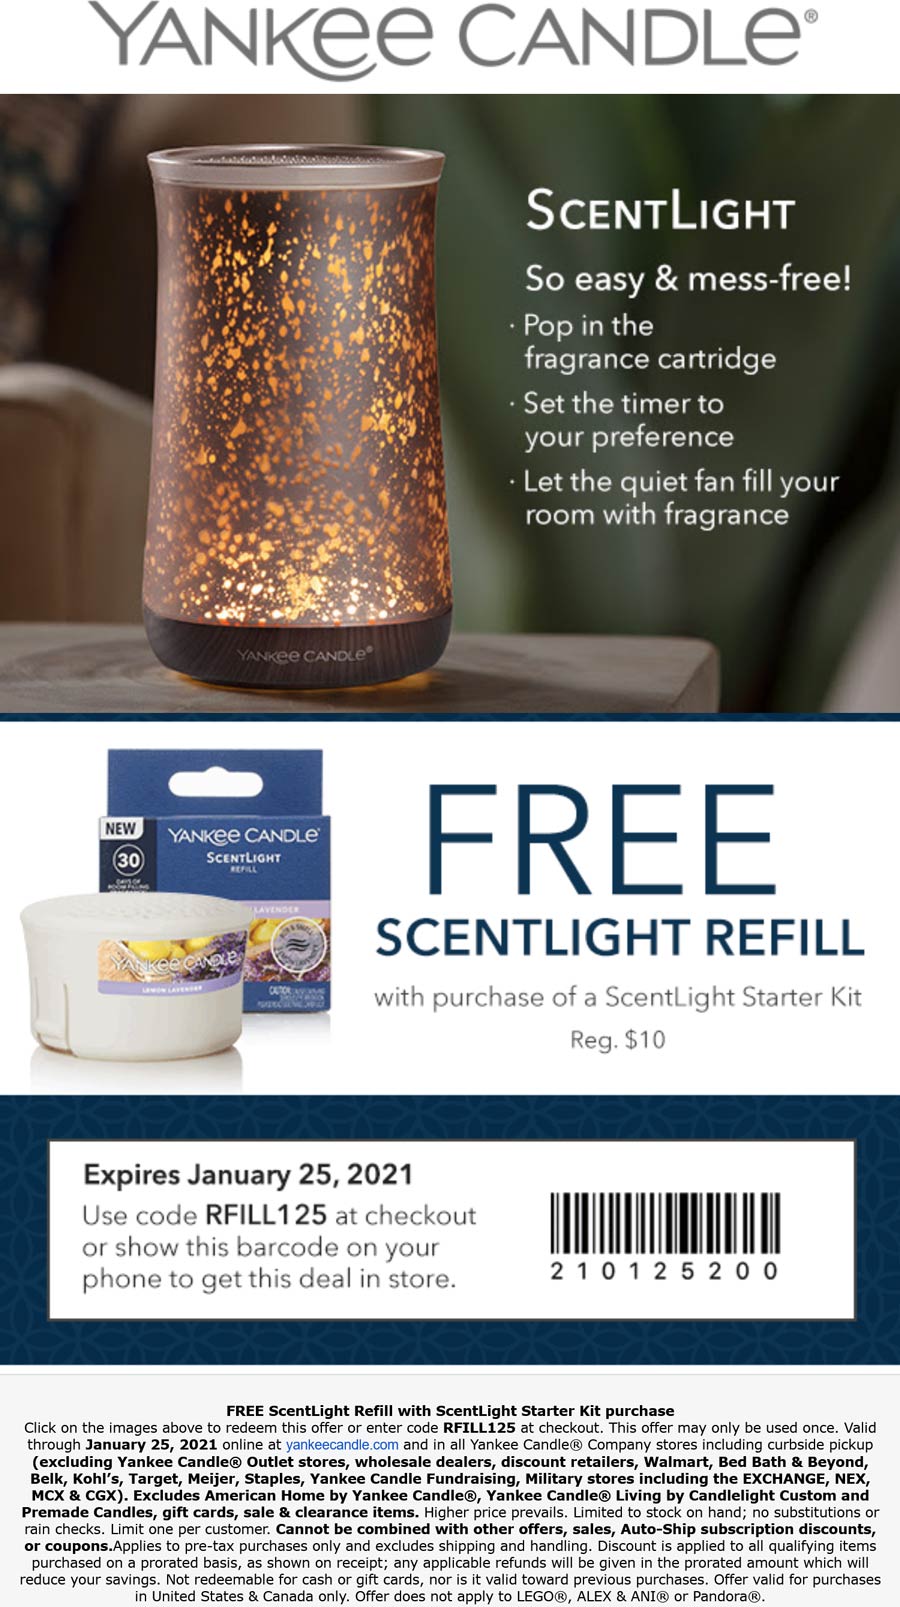 Free refill with your cordless scentlight today at Yankee Candle, or